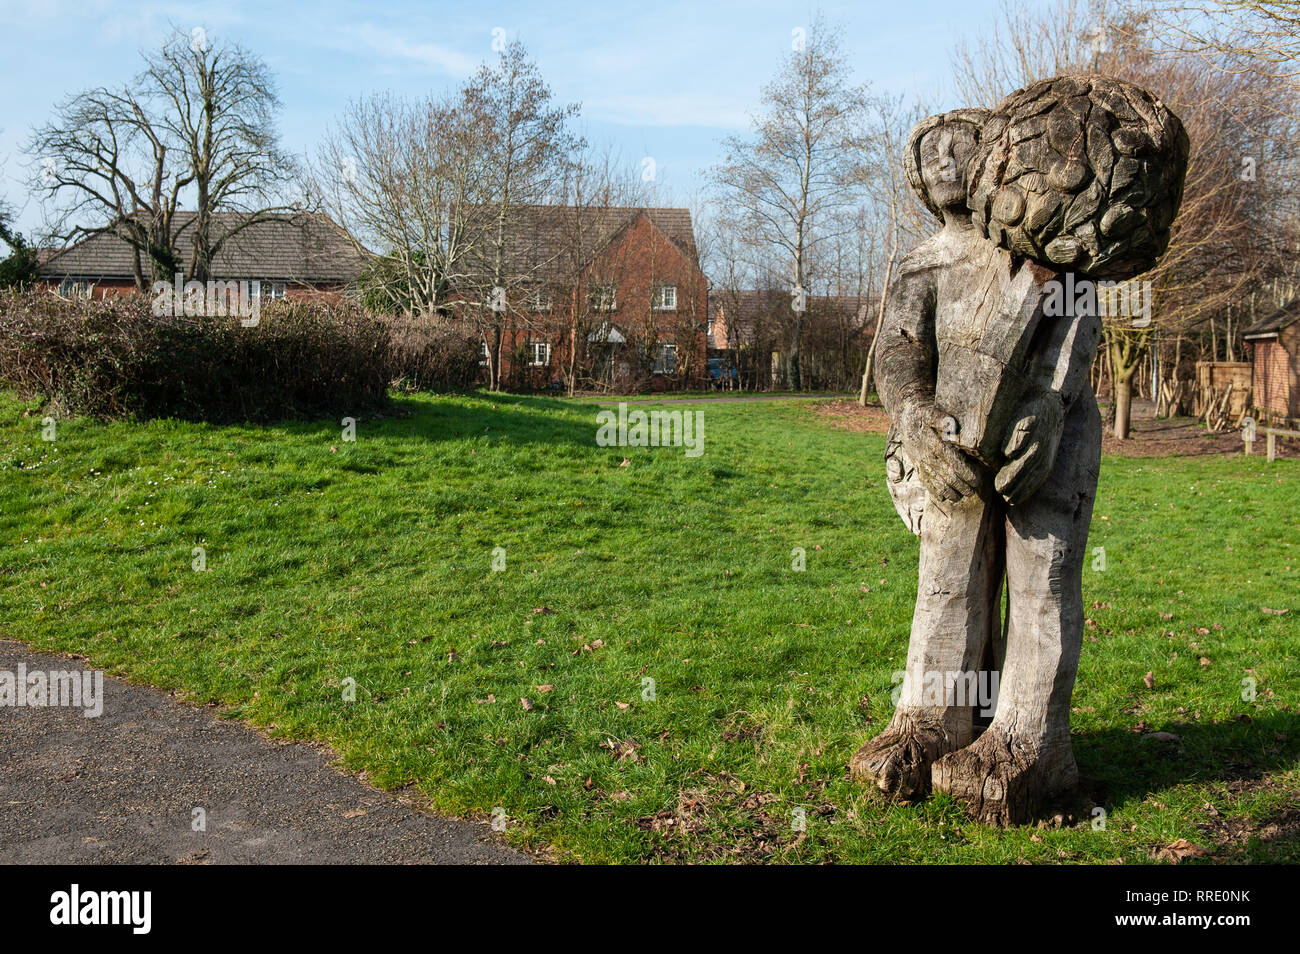 Wooden, carved figures on 'Telly Tubby Land', Leigh Park Estate, Westbury, Wiltshire, UK. Stock Photo